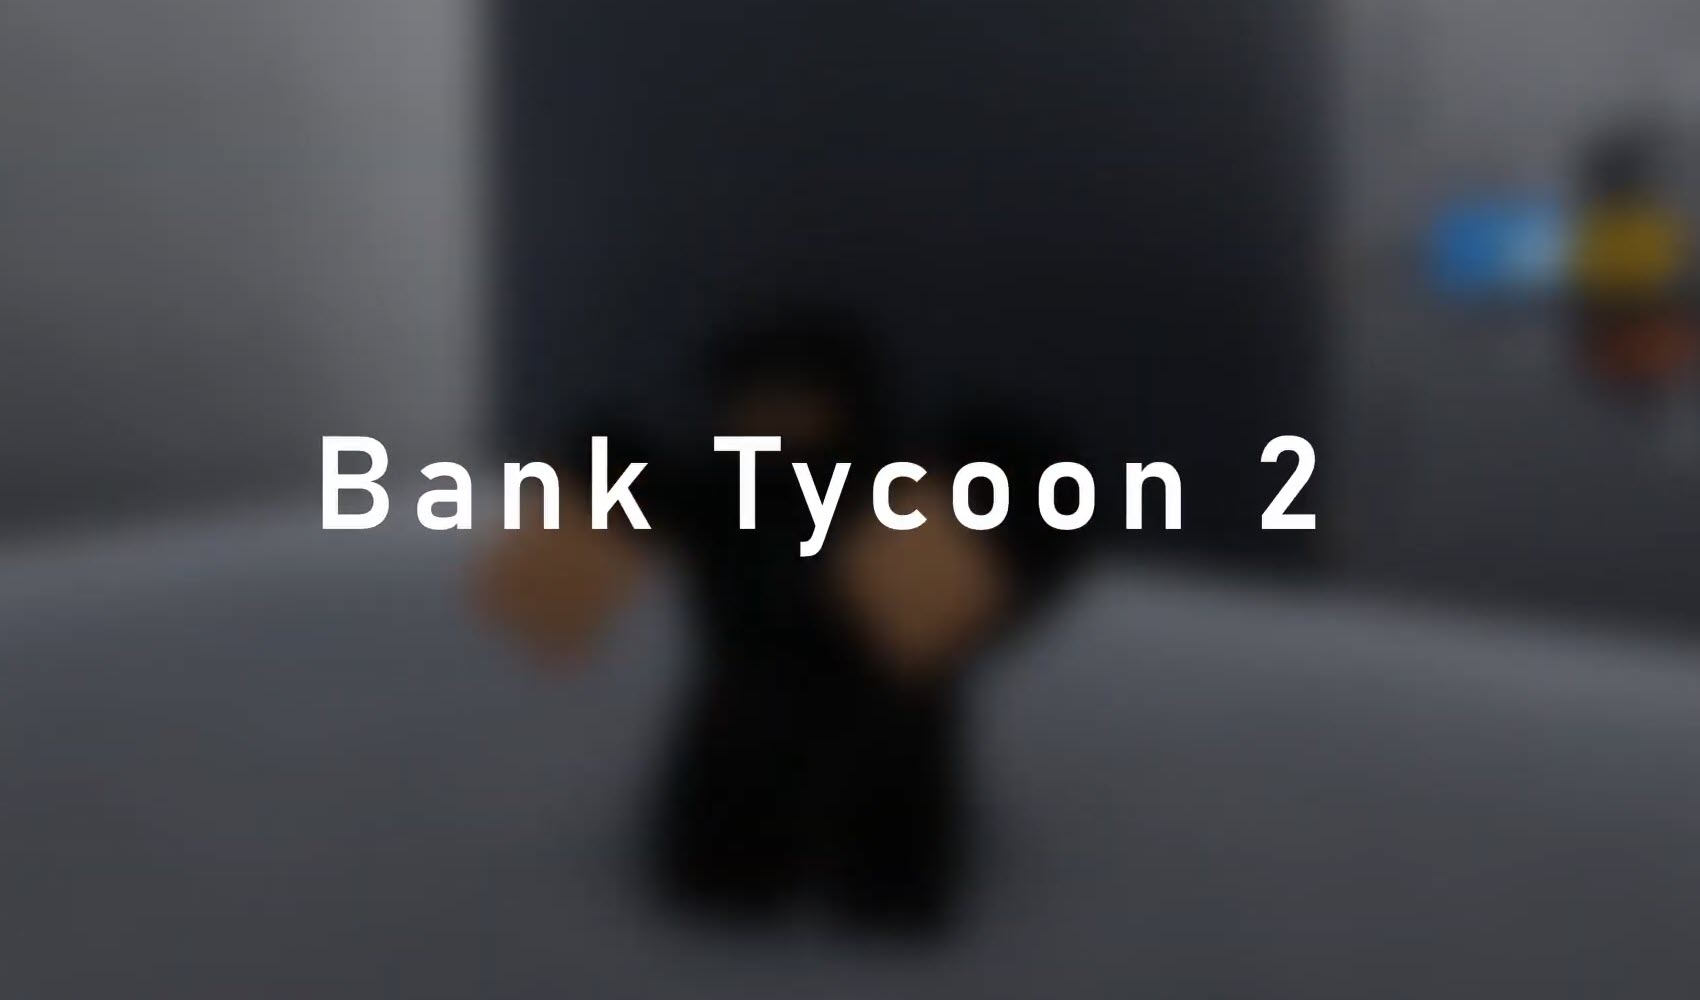 New Bank Tycoon 2 Code List July 2021 Super Easy - roblox bank tycoon games